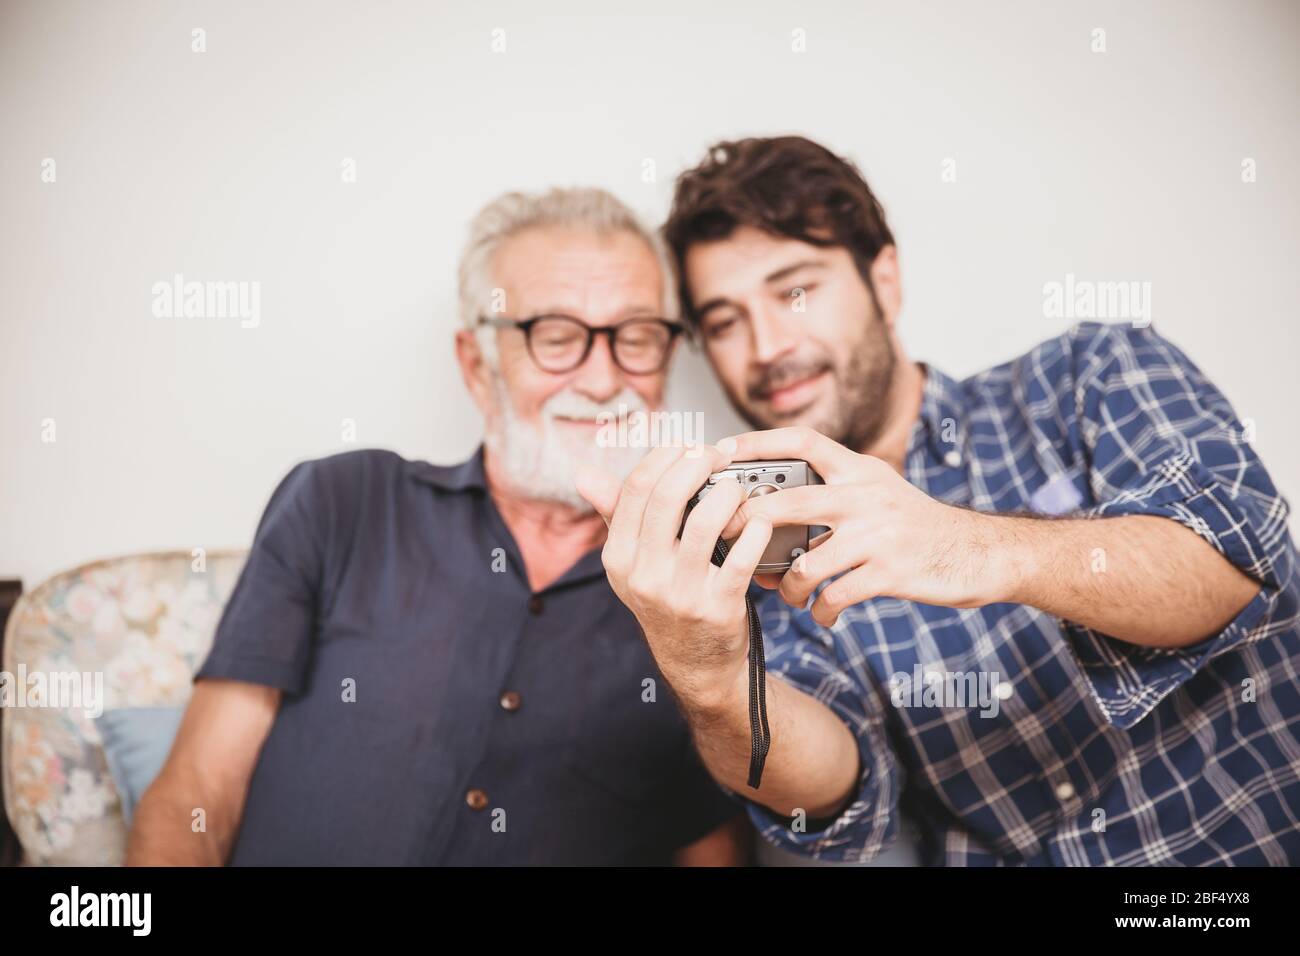 Elder looking replay photos from digital camera with his son happiness family moment with digital device concept. Stock Photo